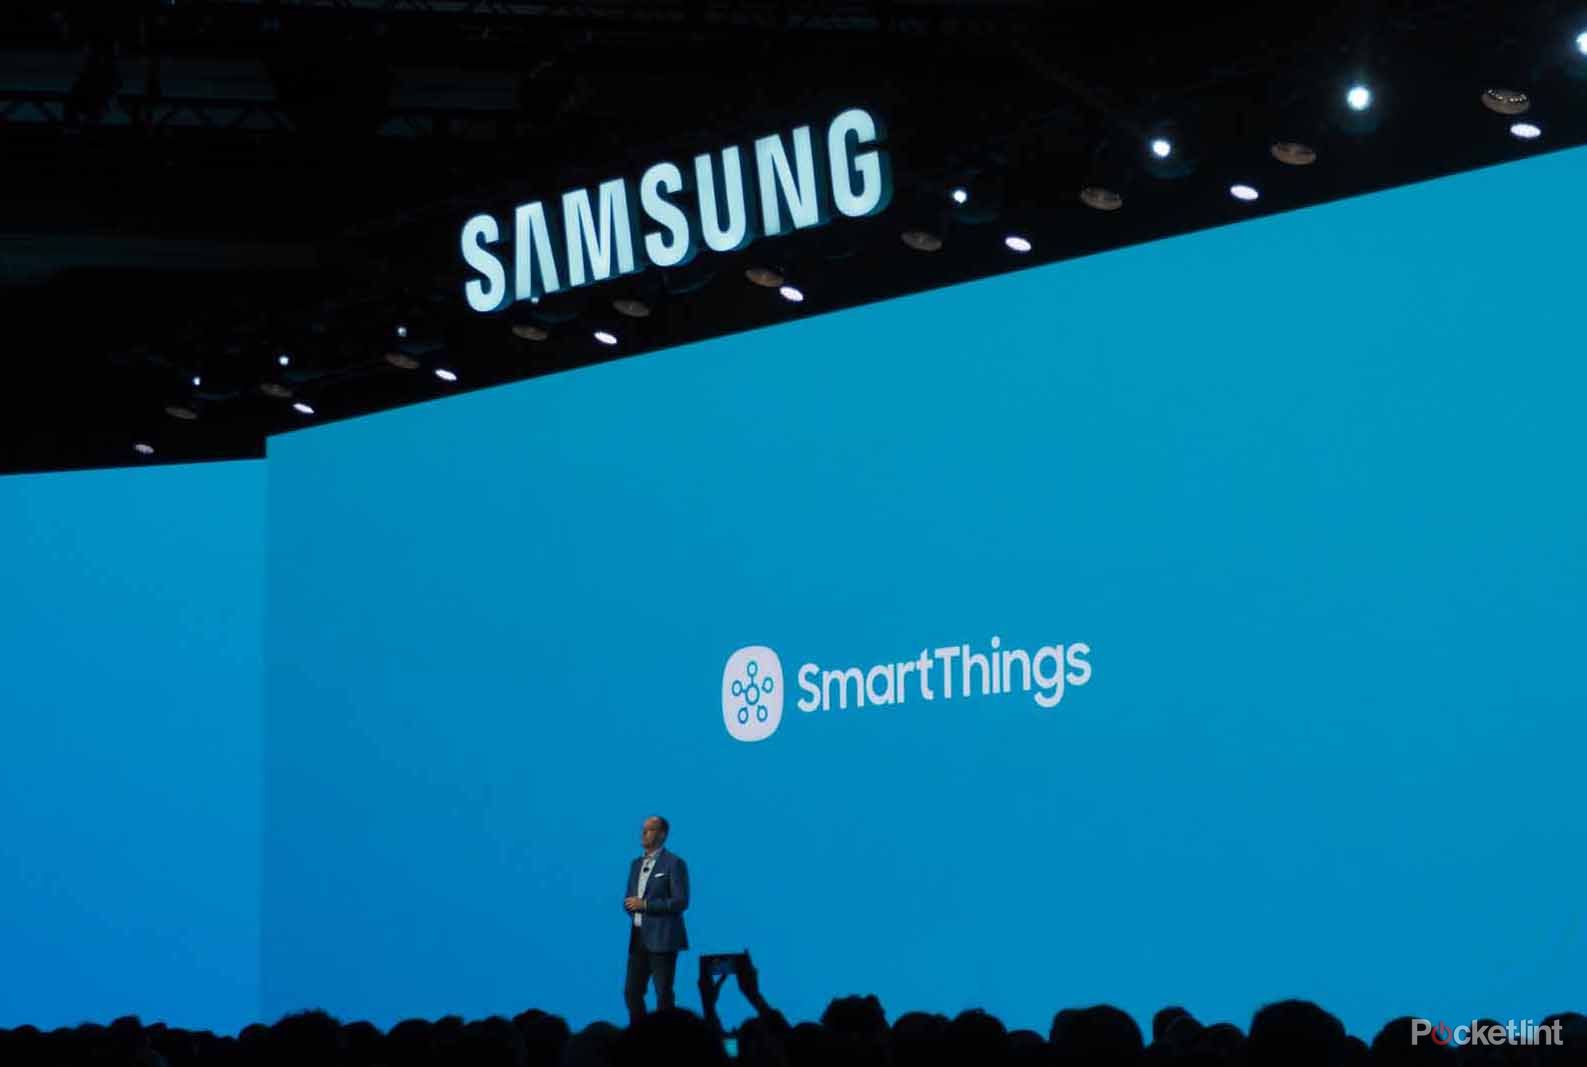 Samsung All our devices will be connected and intelligent by 2020 image 4